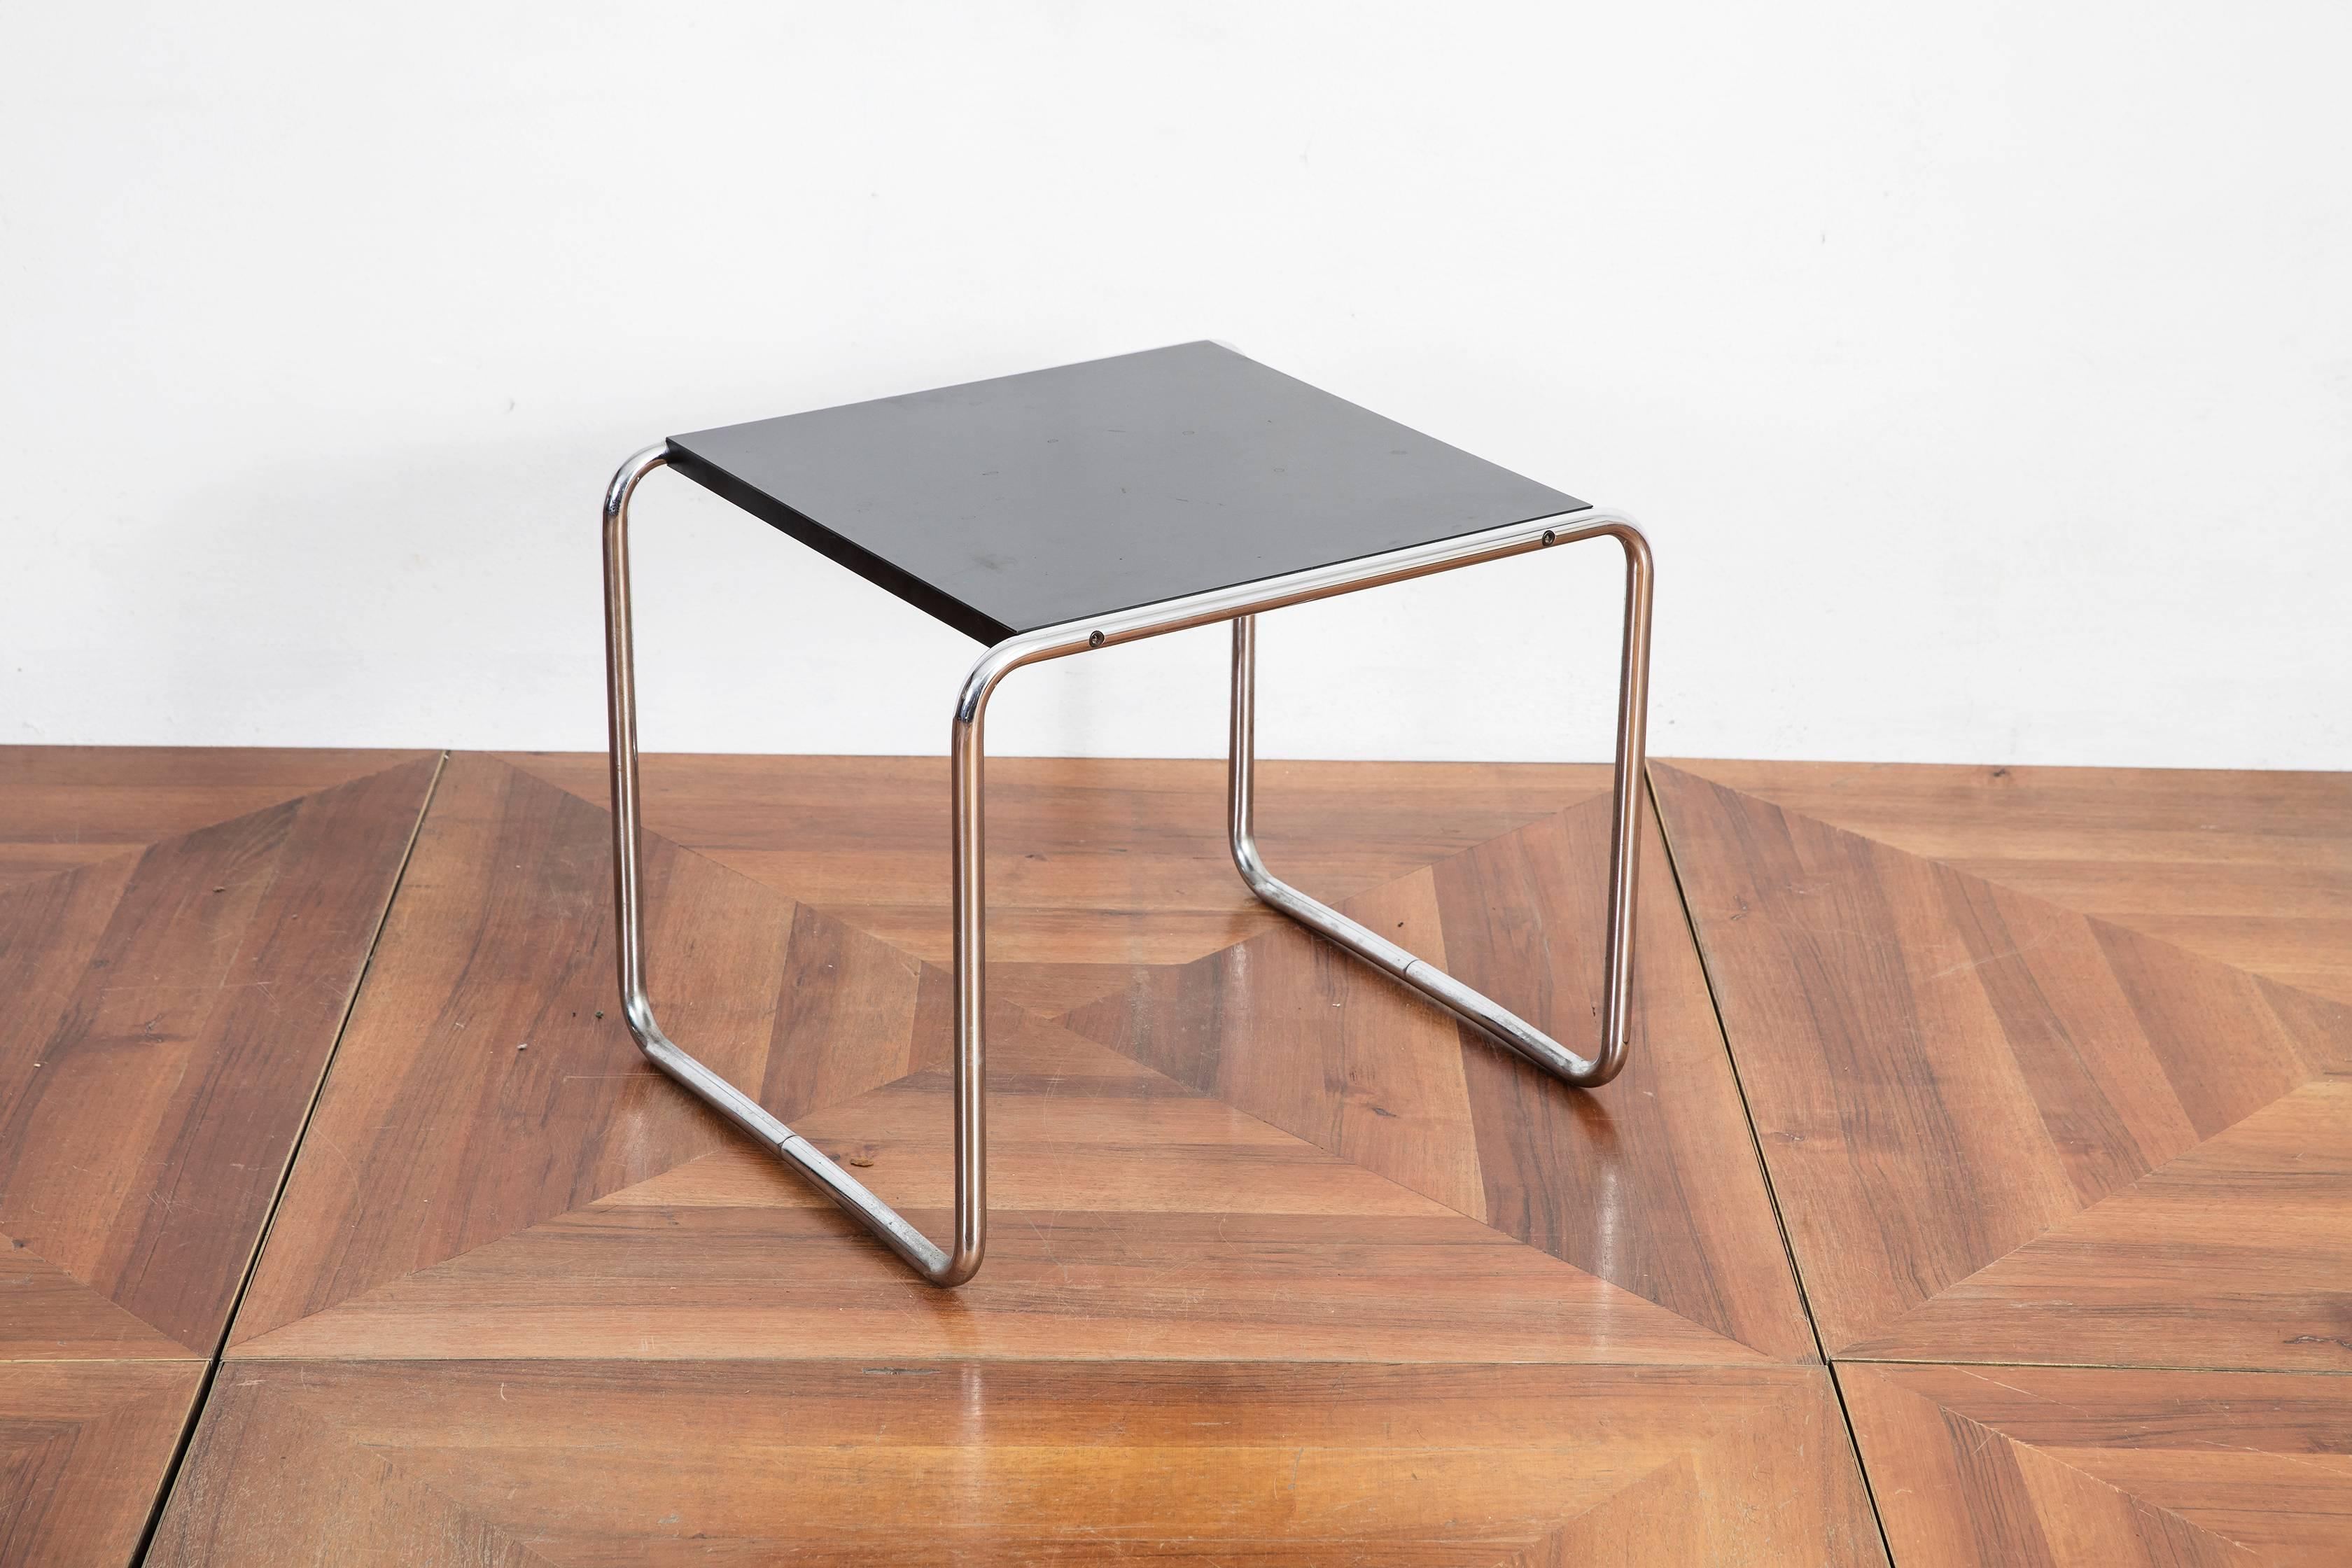 Beautiful and original Gavina black Laccio side table designed by Marcel Breuer. Steel frame and black laminated wood tabletop.
Originally the tables were produced by Thonet. From 1962 until 1968 by Gavina and after 1968 by Knoll.

The Laccio